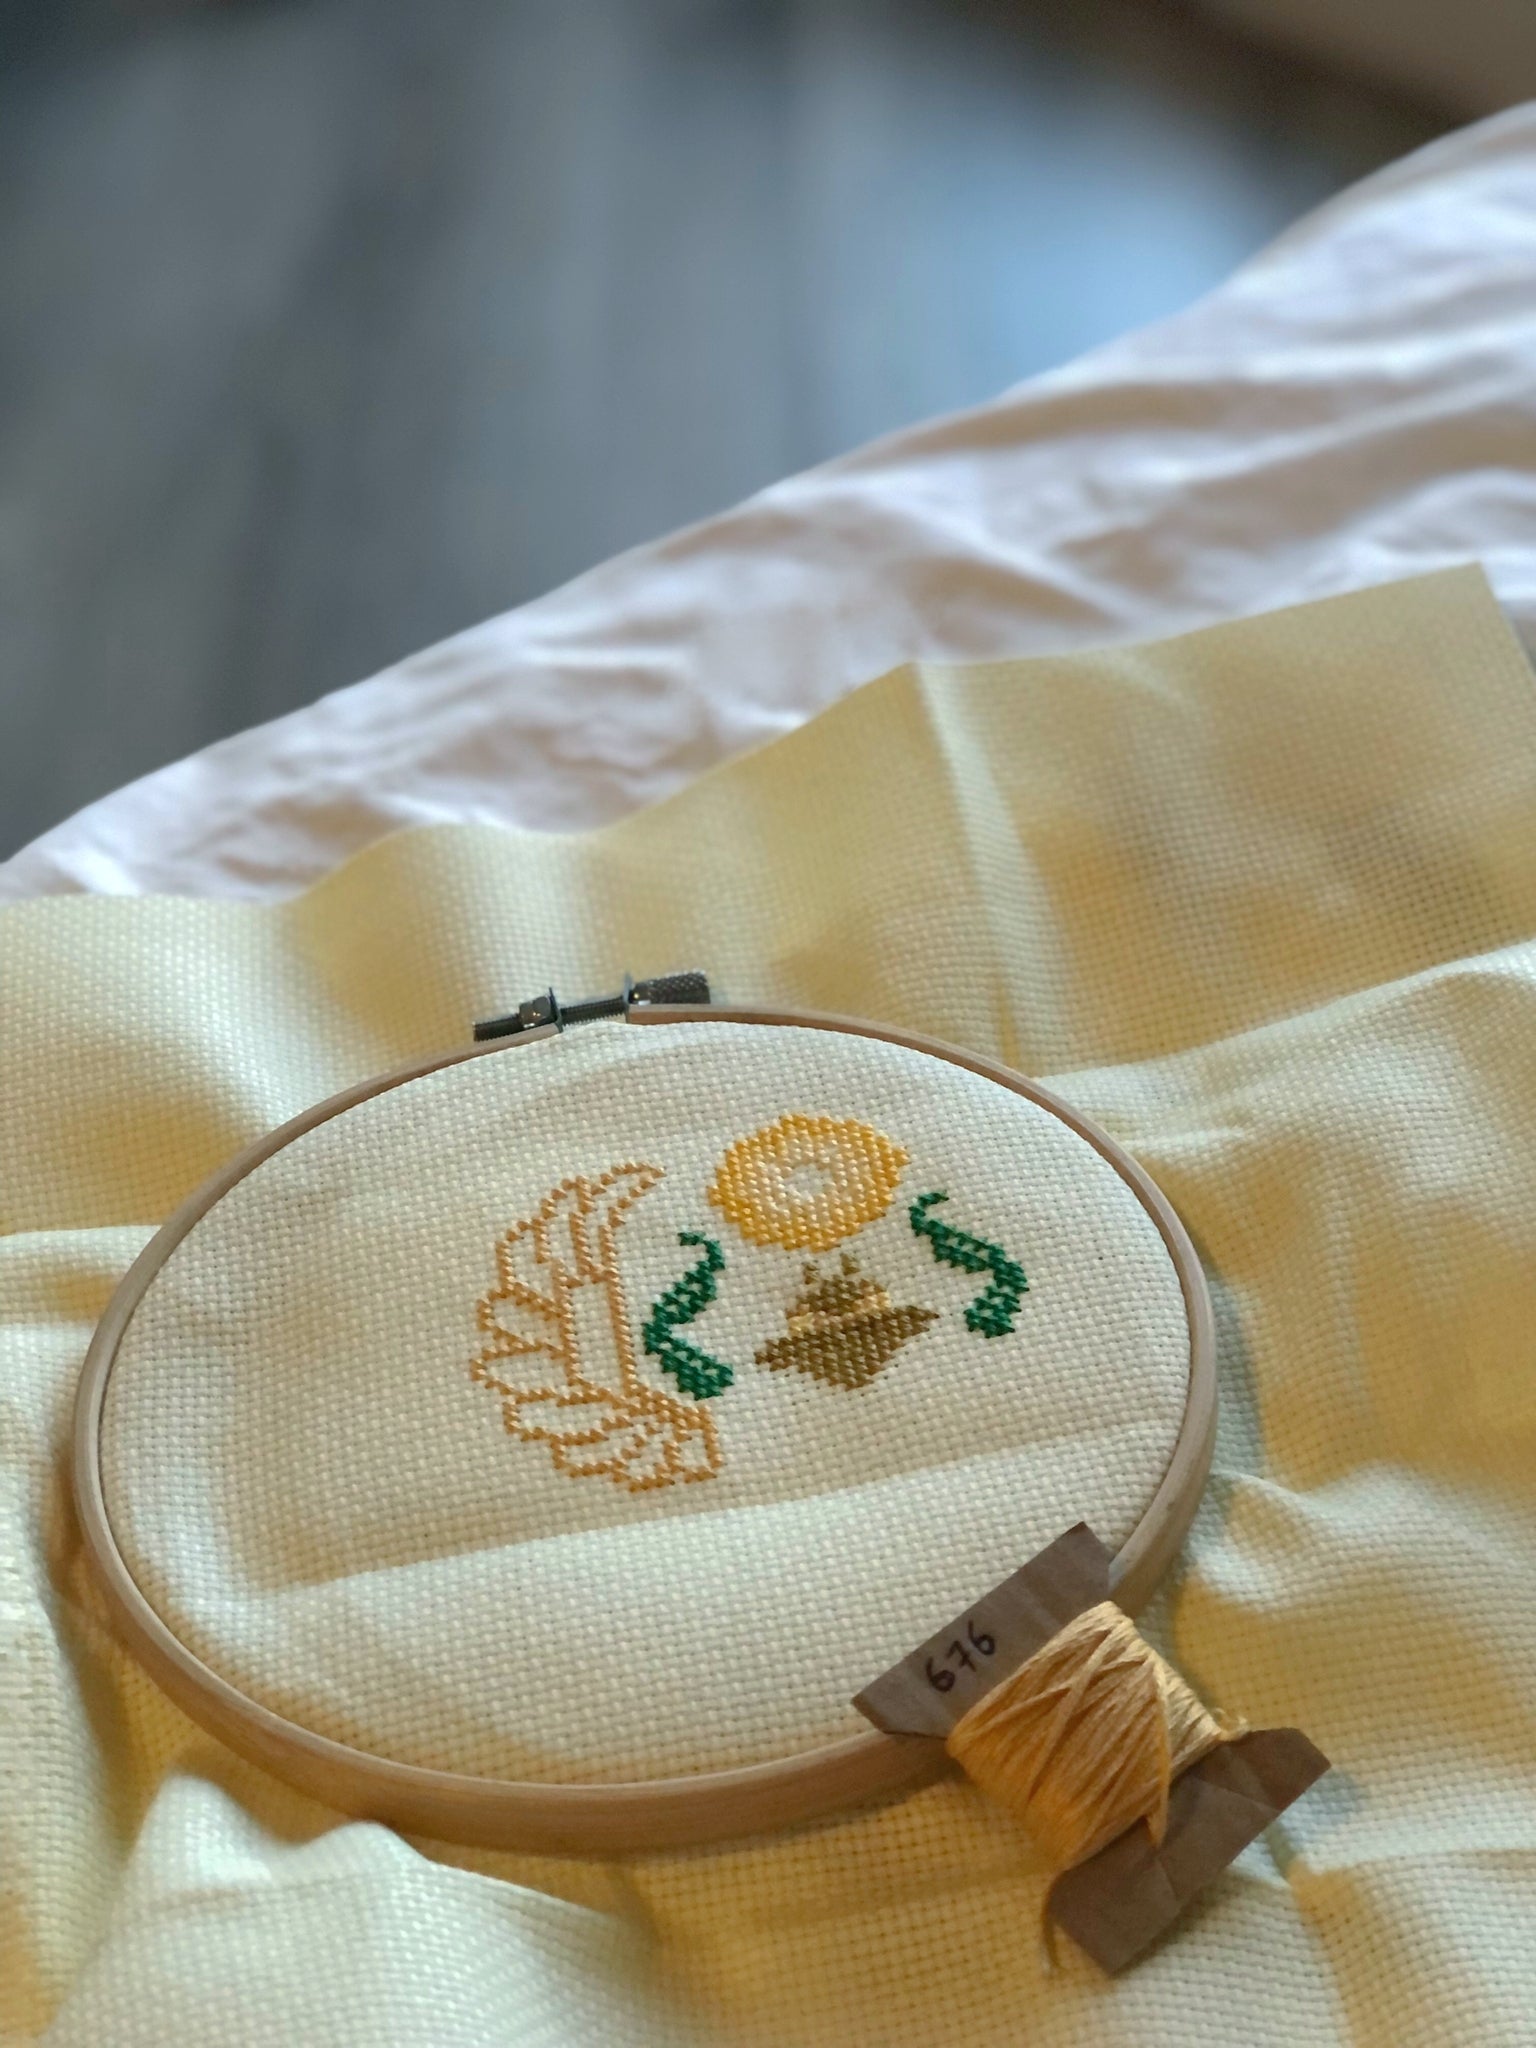 Picture of the work-in-progress of the Egyptian scarab cross stitch pattern. A small part of the pattern has been stitched: only the head, front paws, sun and part of the lefthand wing are visible. Piece is framed in a hoop, bobbin in the foreground.